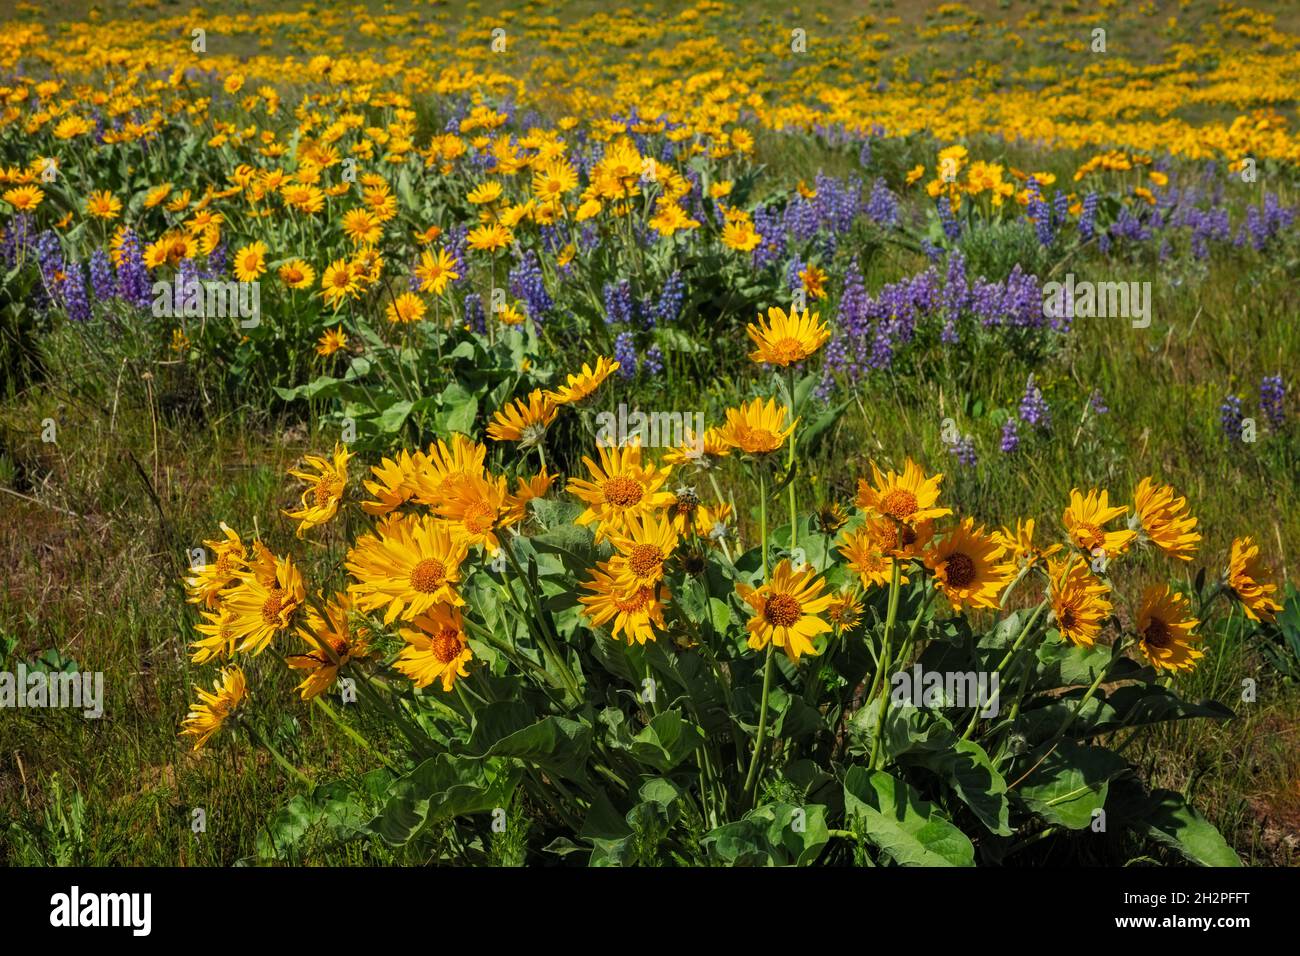 WA19708-00...WASHINGTON - Balsamroot and lupine blooming along the Sage Hills Trail above the town of Wenatchee. Stock Photo